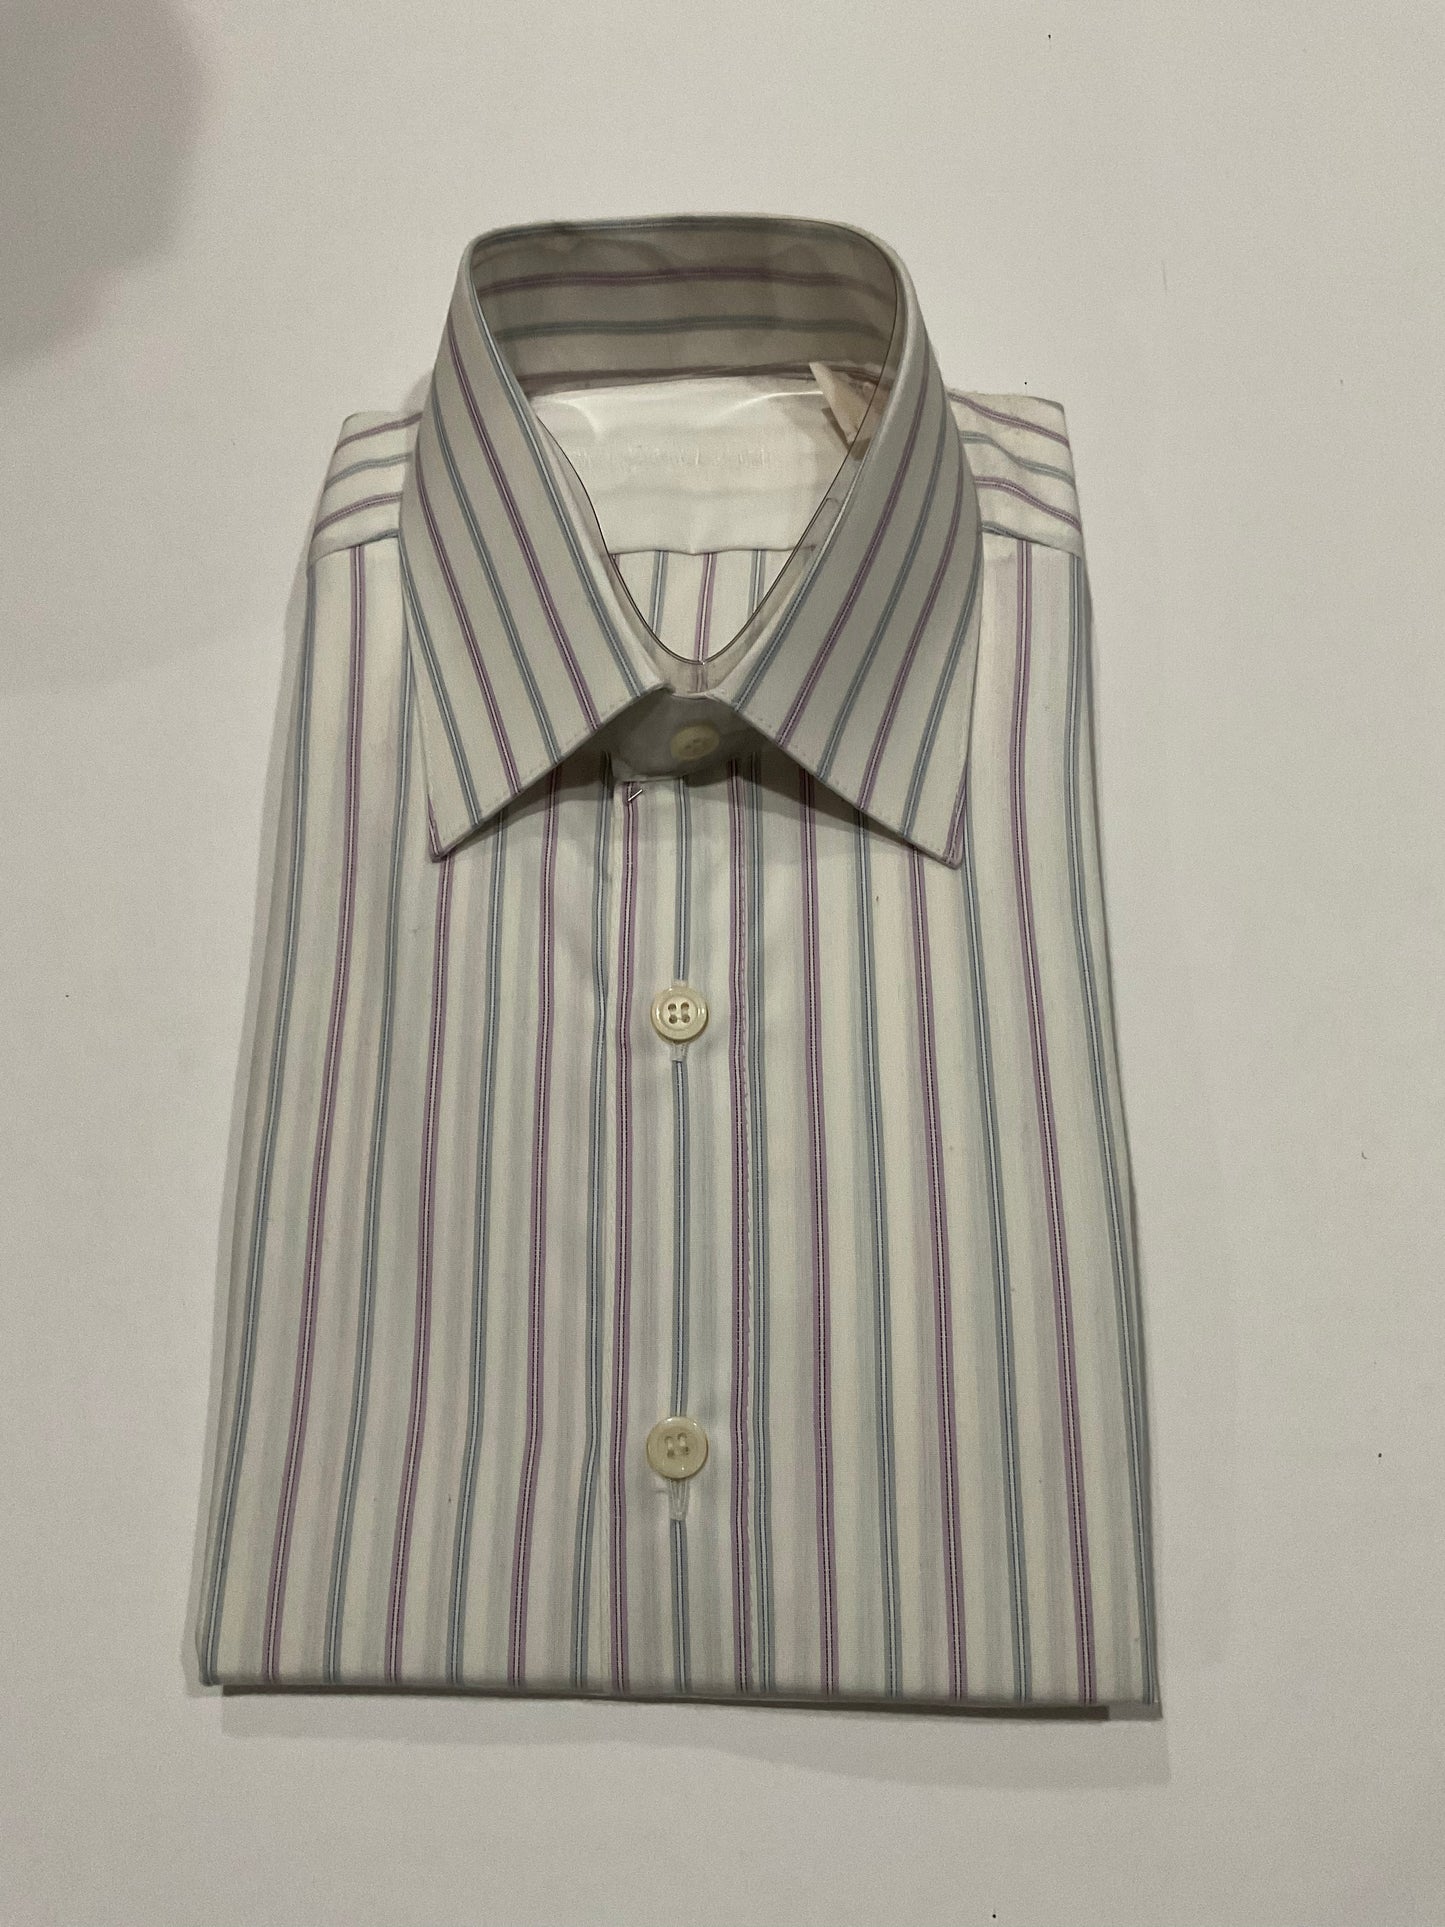 R P SHIRT / PURE COTTON / SIZE 15 / MADE IN GERMANY